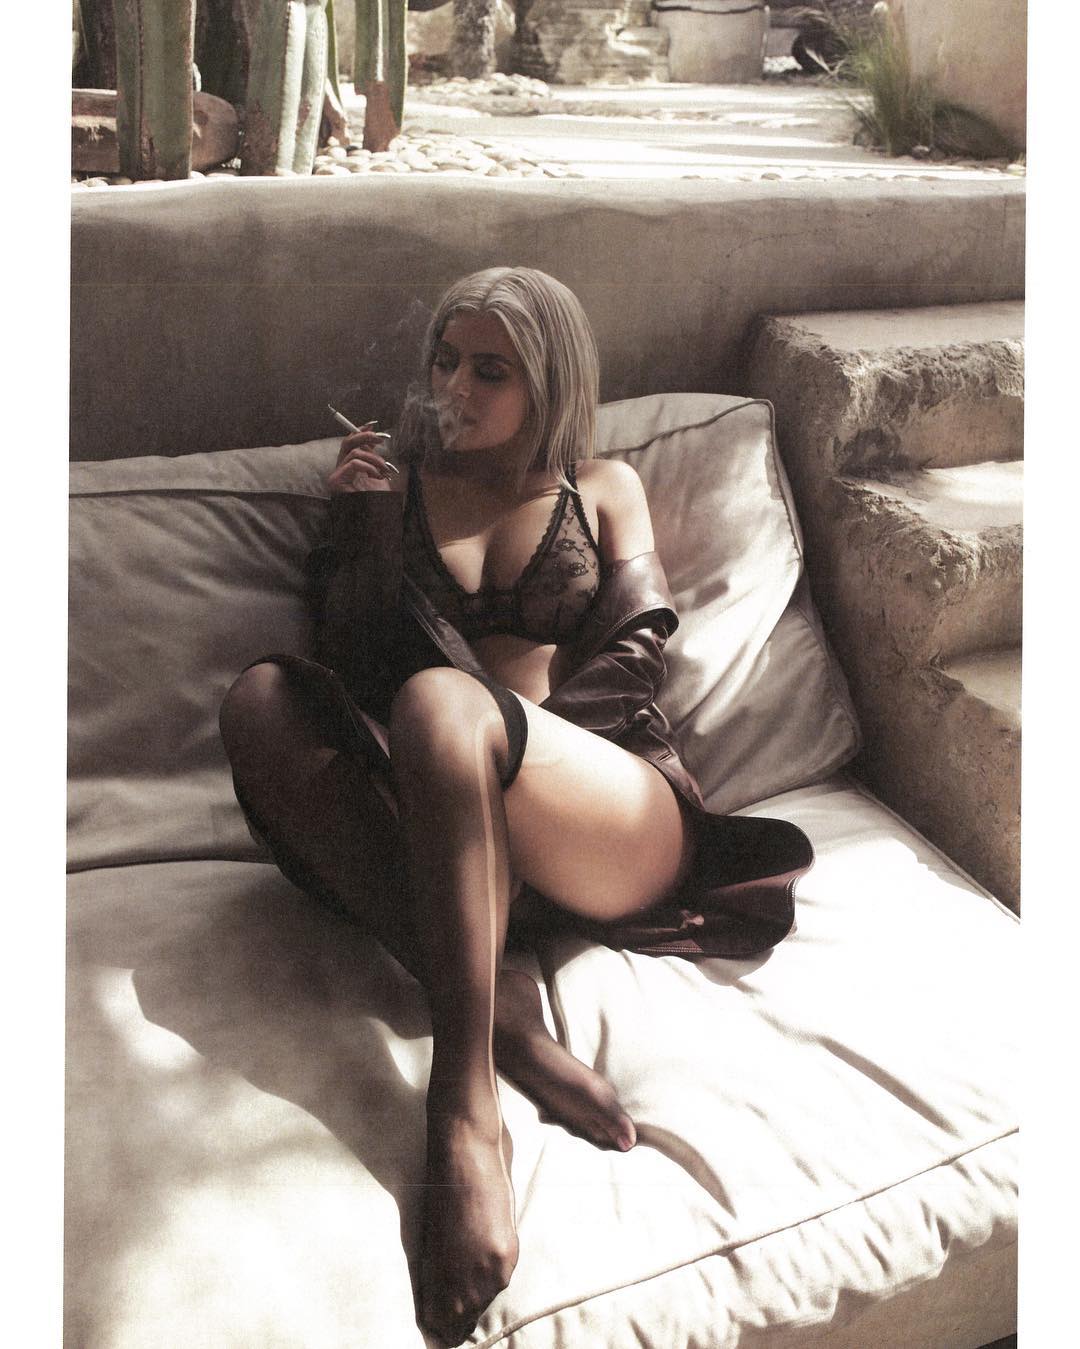 Kylie Jenner Shows Off Her New Lingerie on Twitter